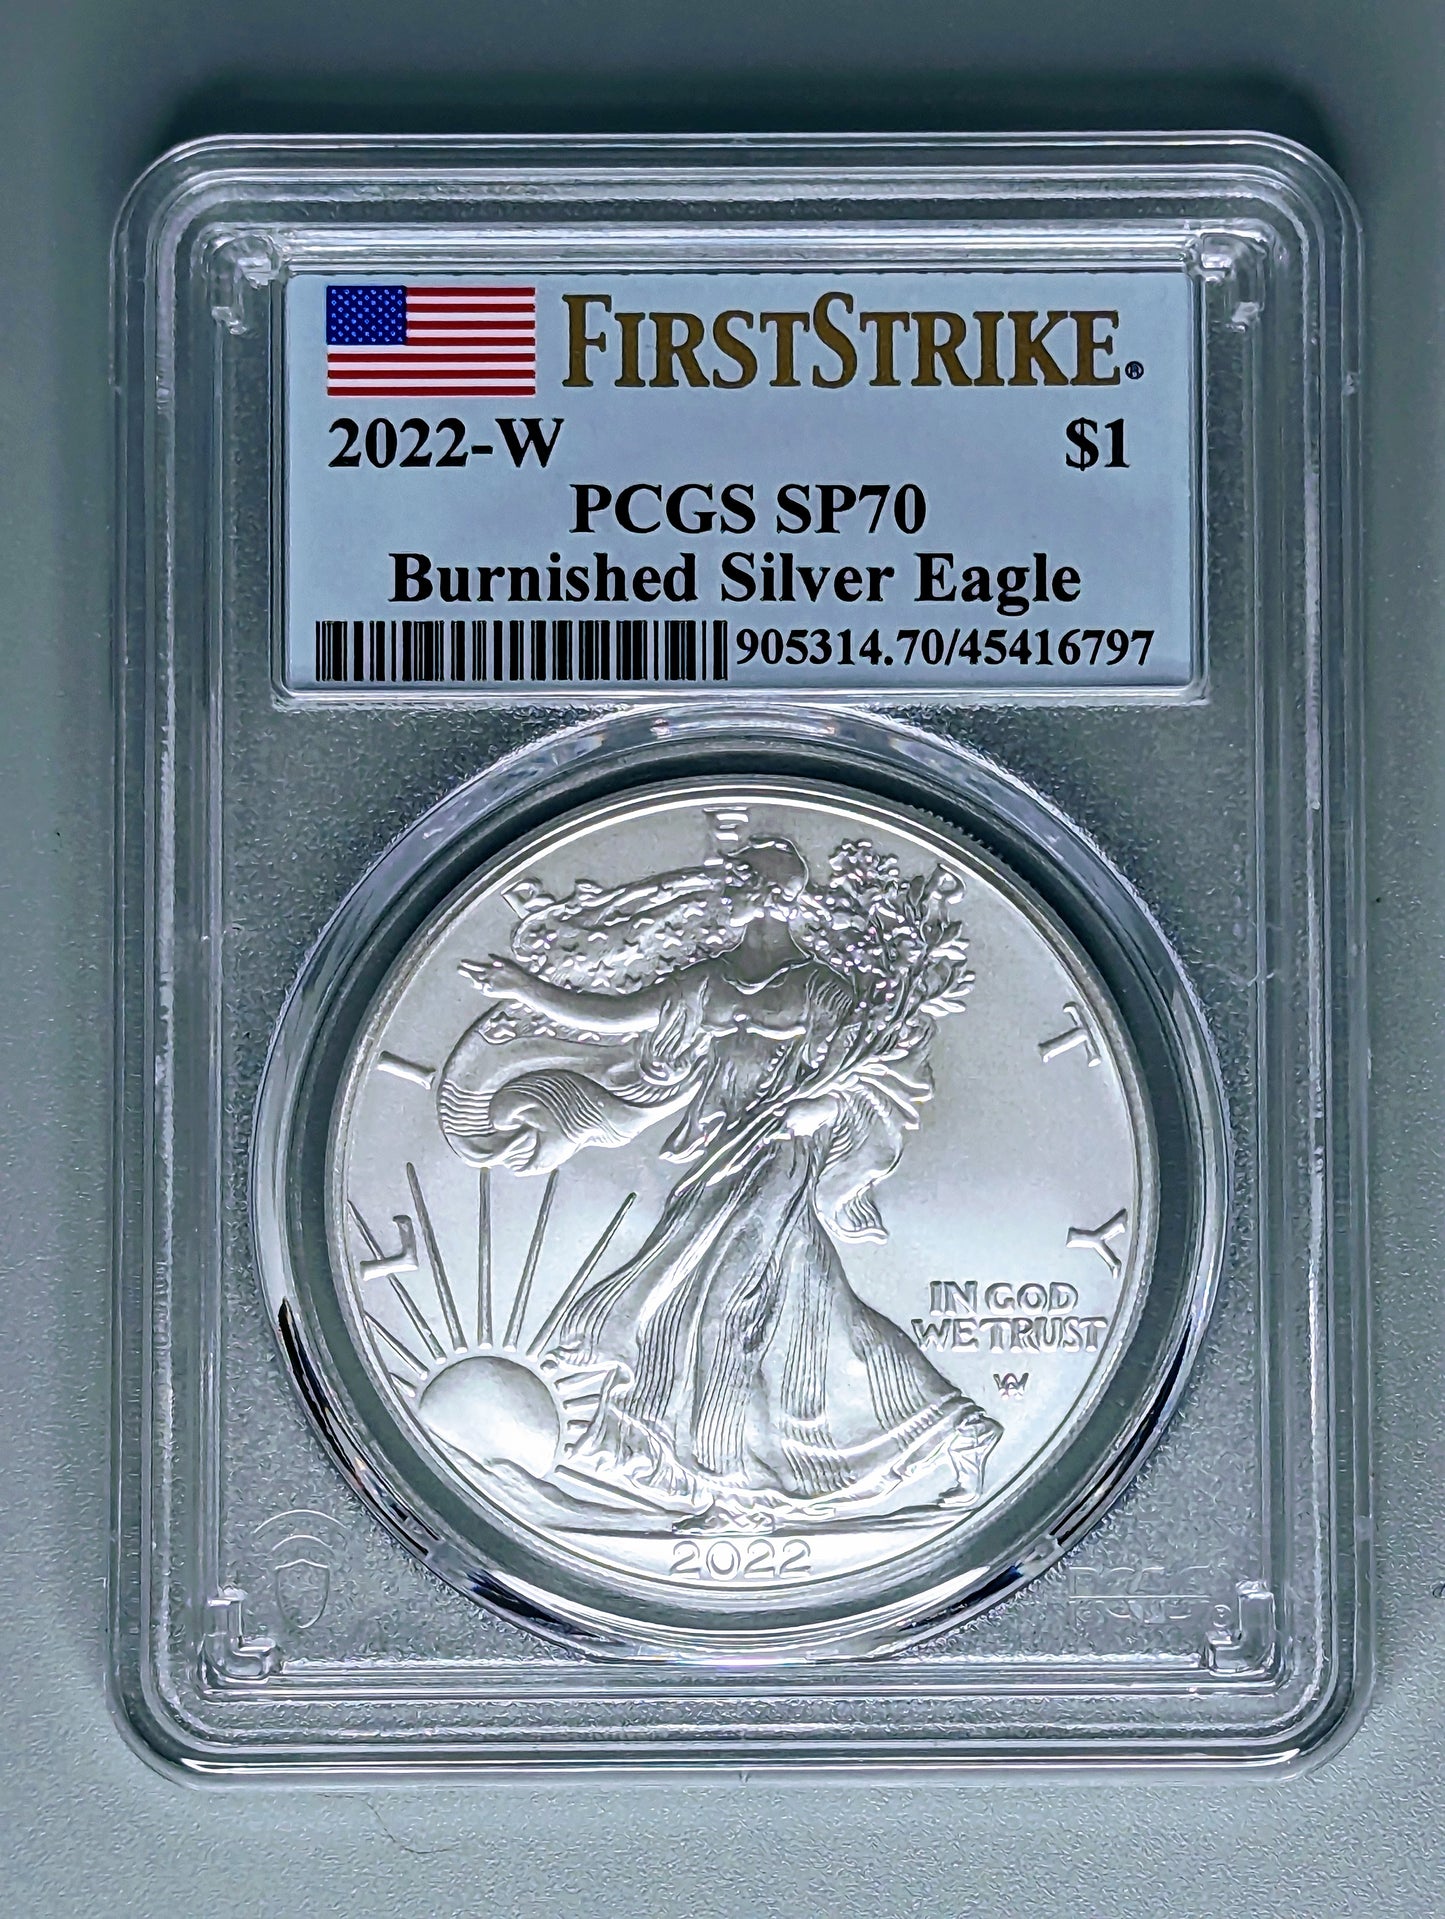 2022-W Burnished Silver Eagle Uncirculated Coin - SP70 PCGS - Frist Strike